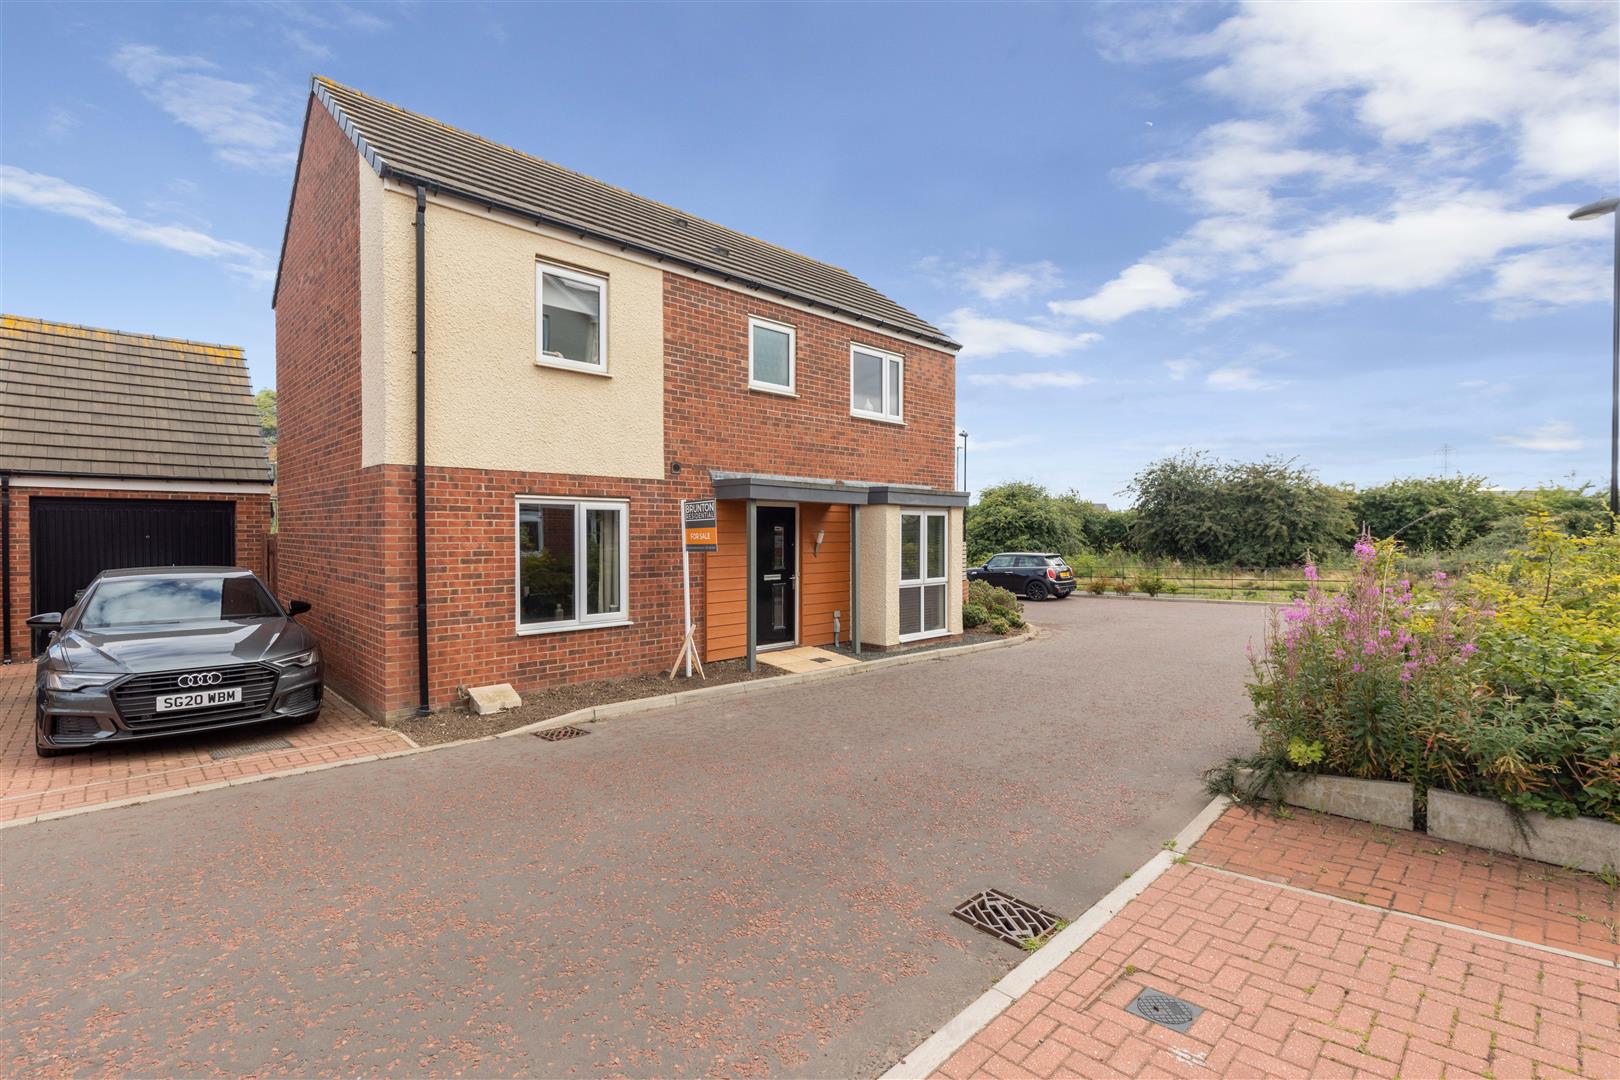 3 bed detached house for sale in Elemore Close, Great Park 0